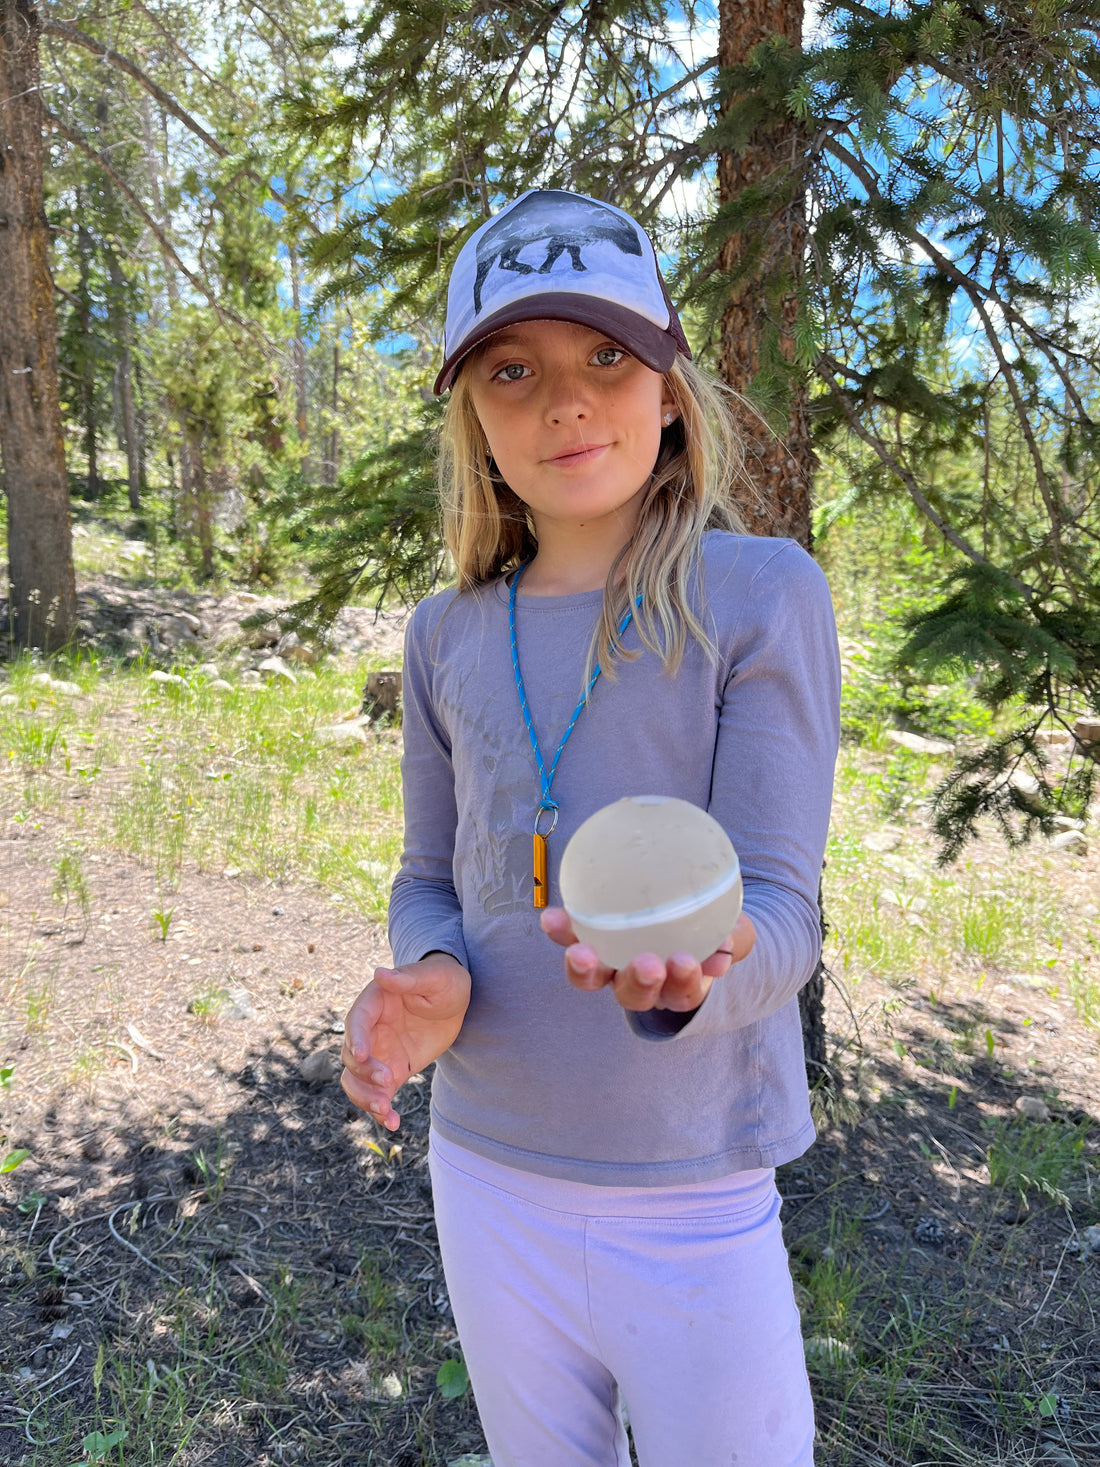 Camper holding a re-useable waterballoon for a camp activity in the Uinta Mountains.